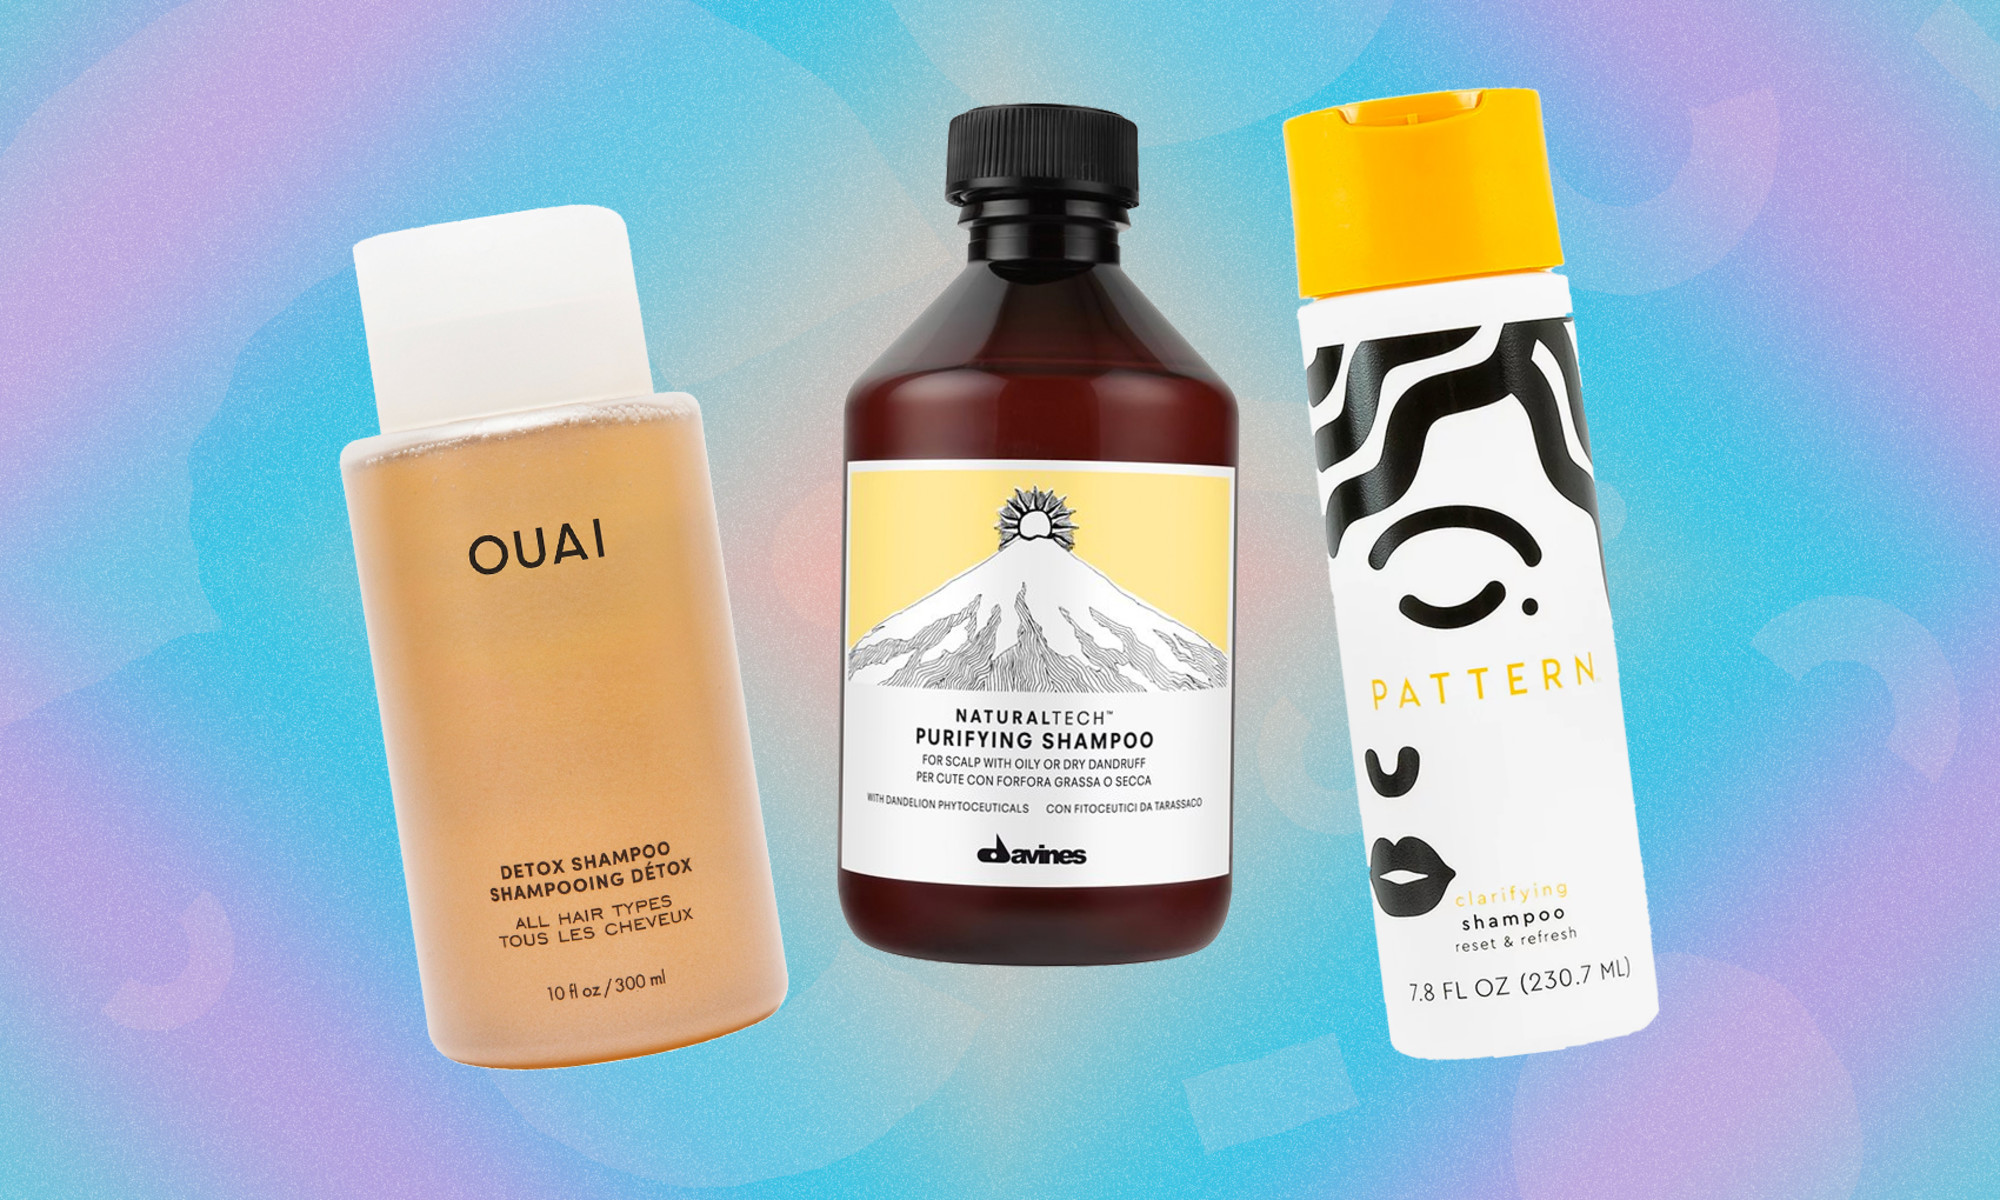 Found: The 10 Best Clarifying Shampoos Your Scalp Will Love